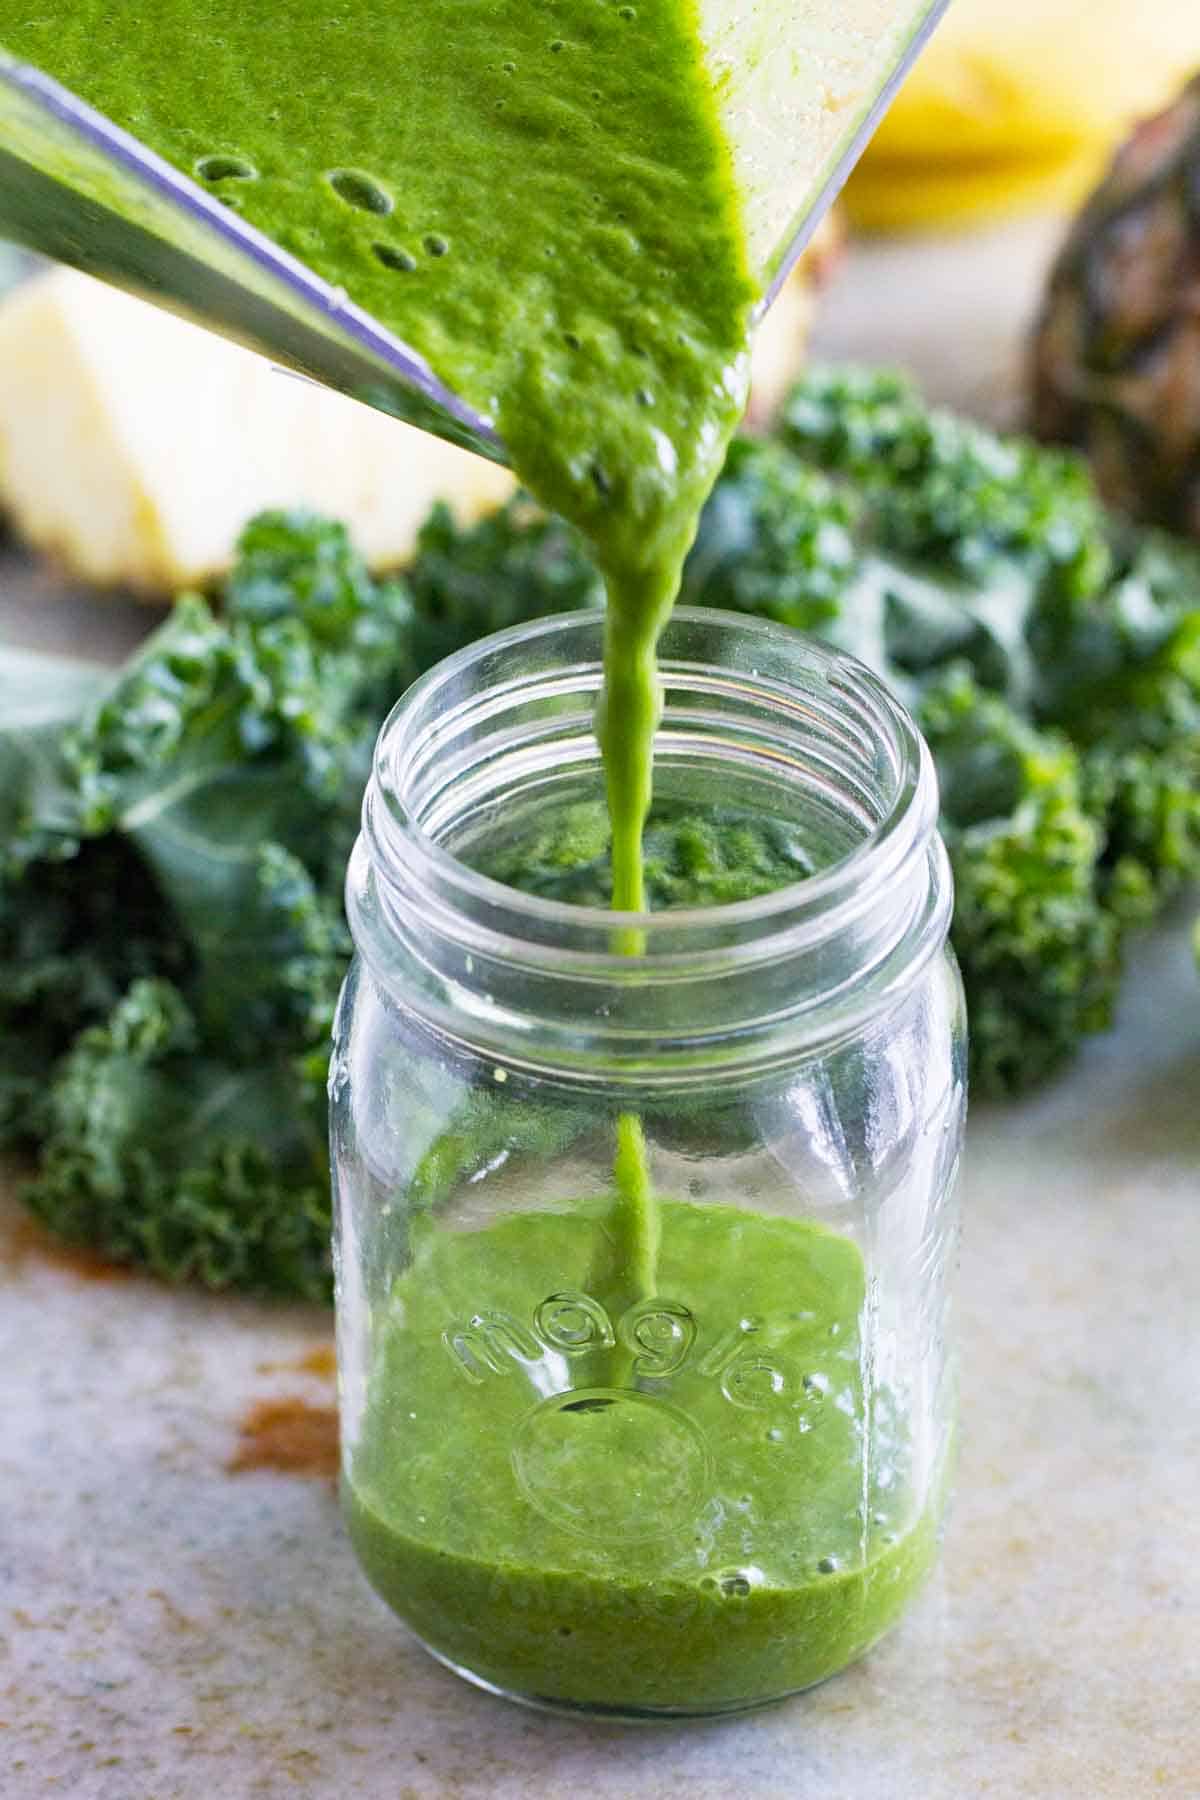 pouring kale smoothie into a jar